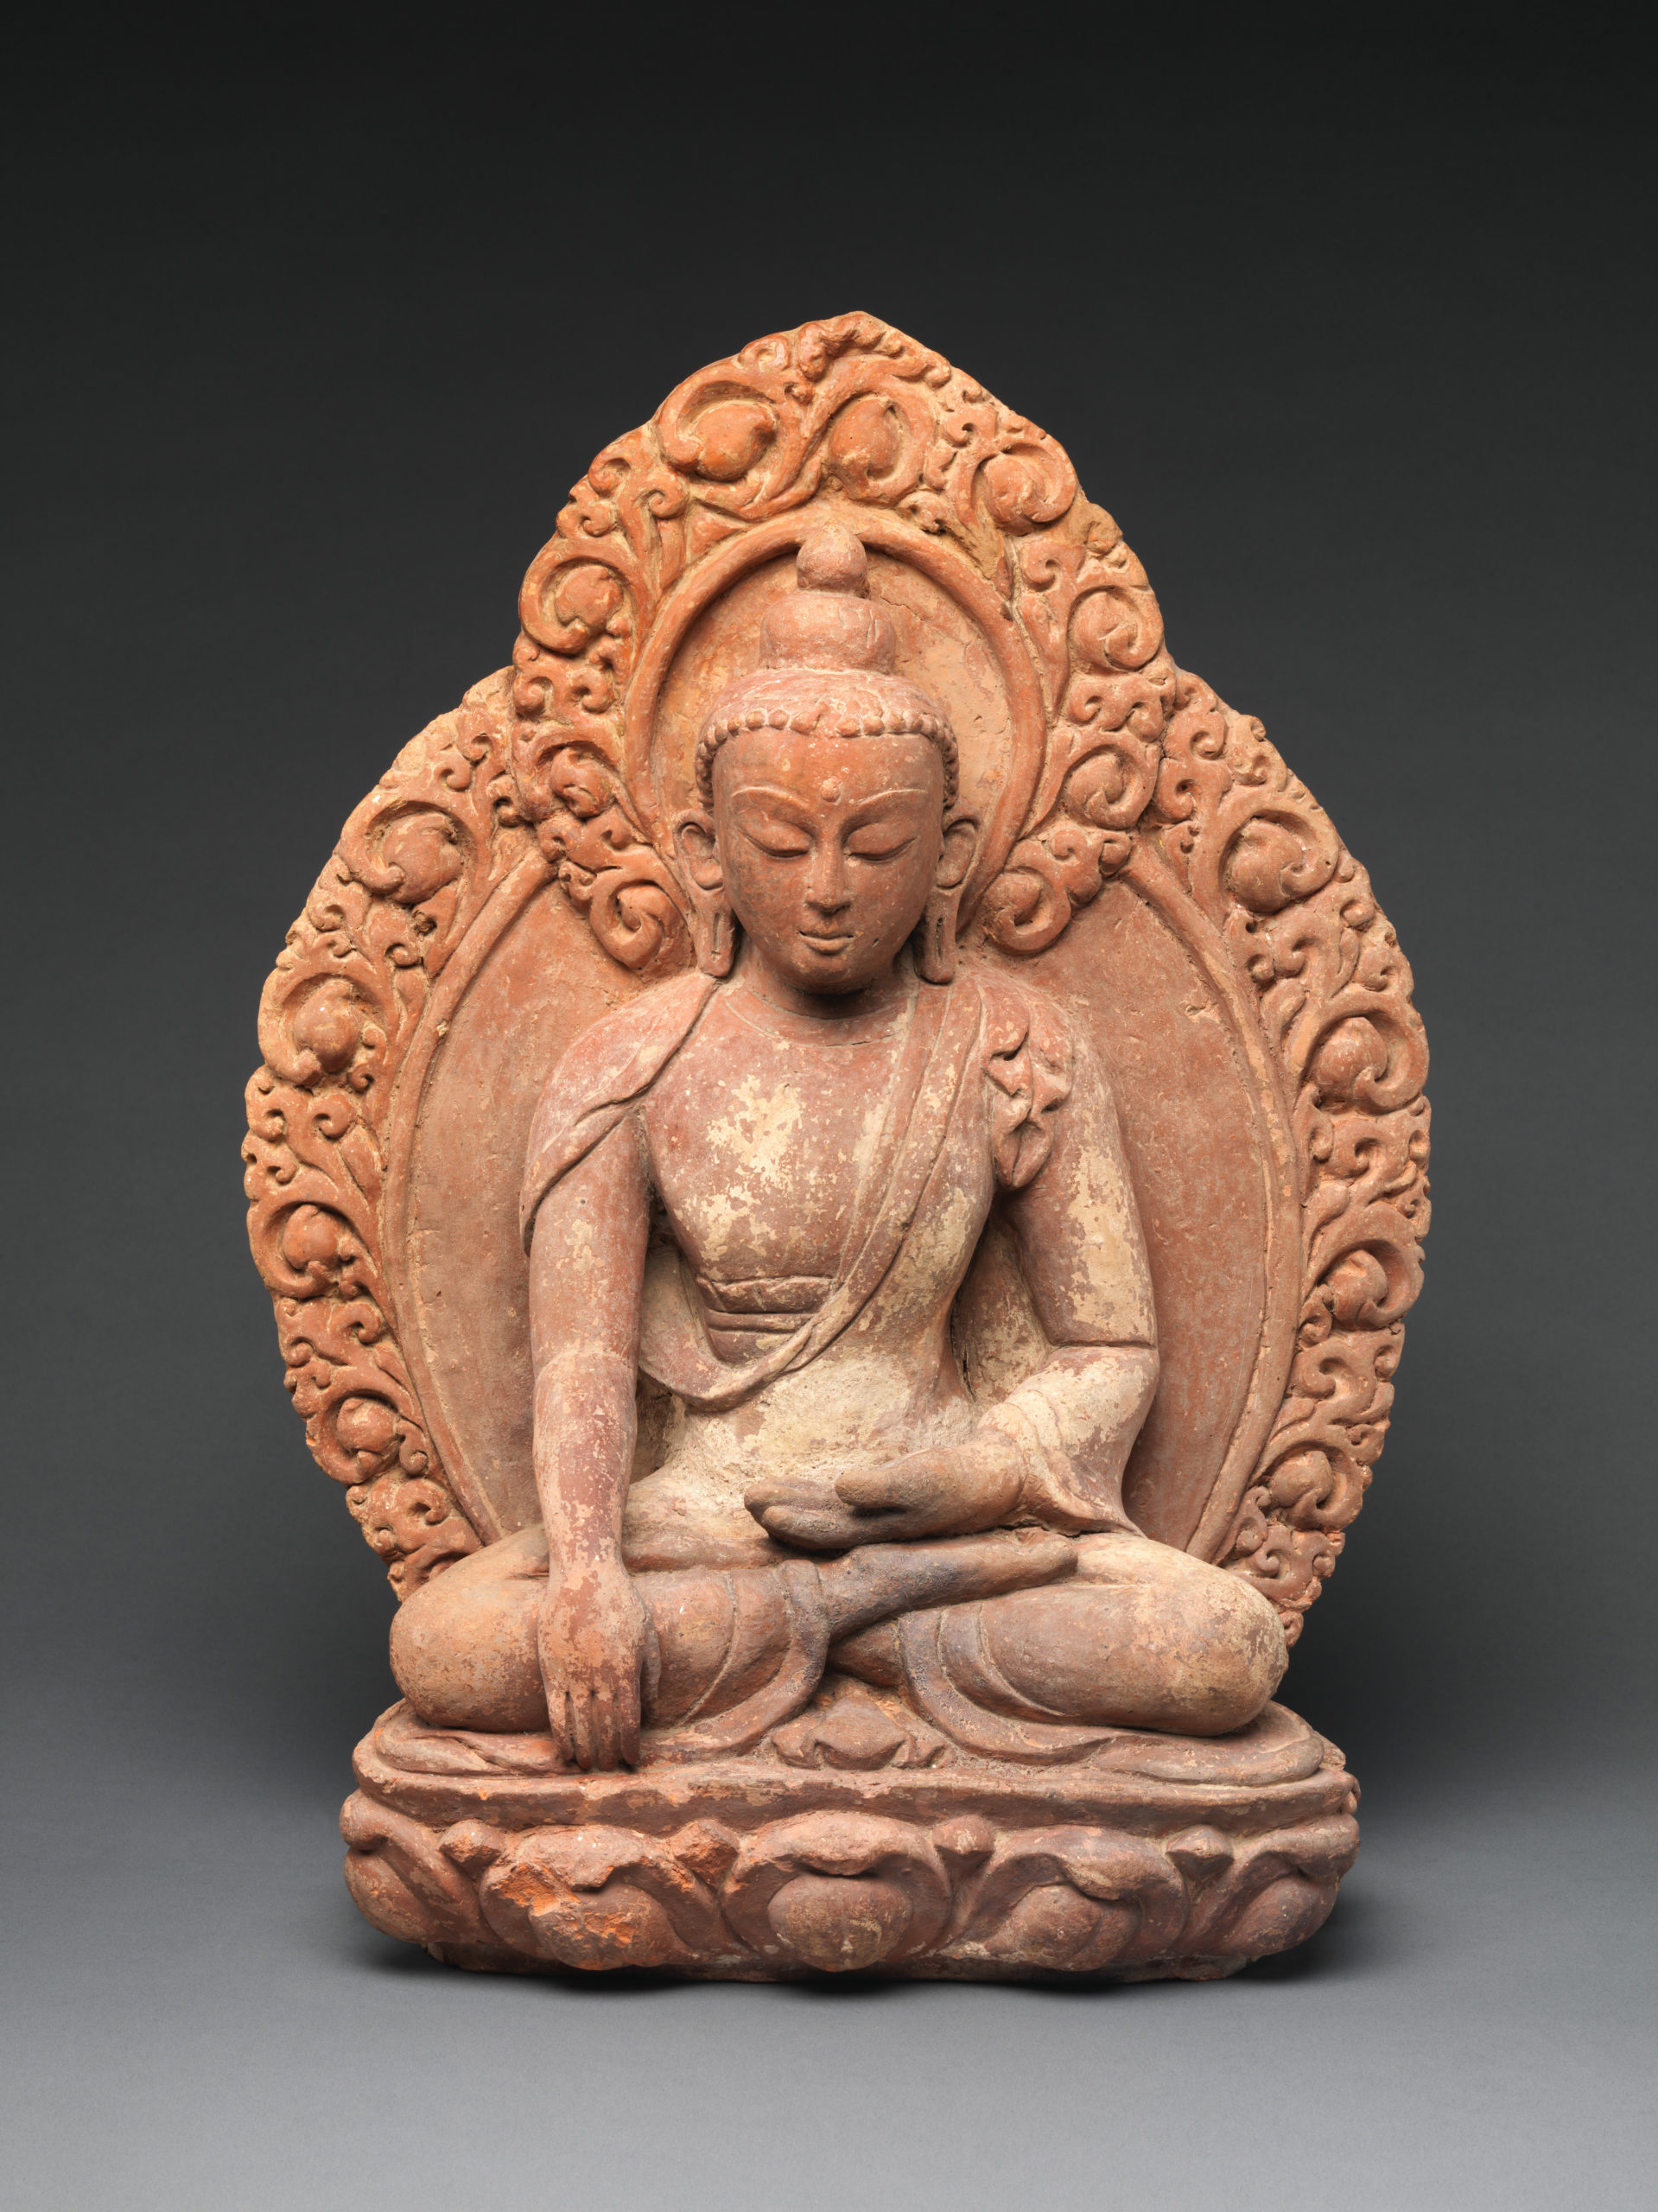 Buddha Statue Meanings: 12 Symbolic Poses and Postures | LoveToKnow